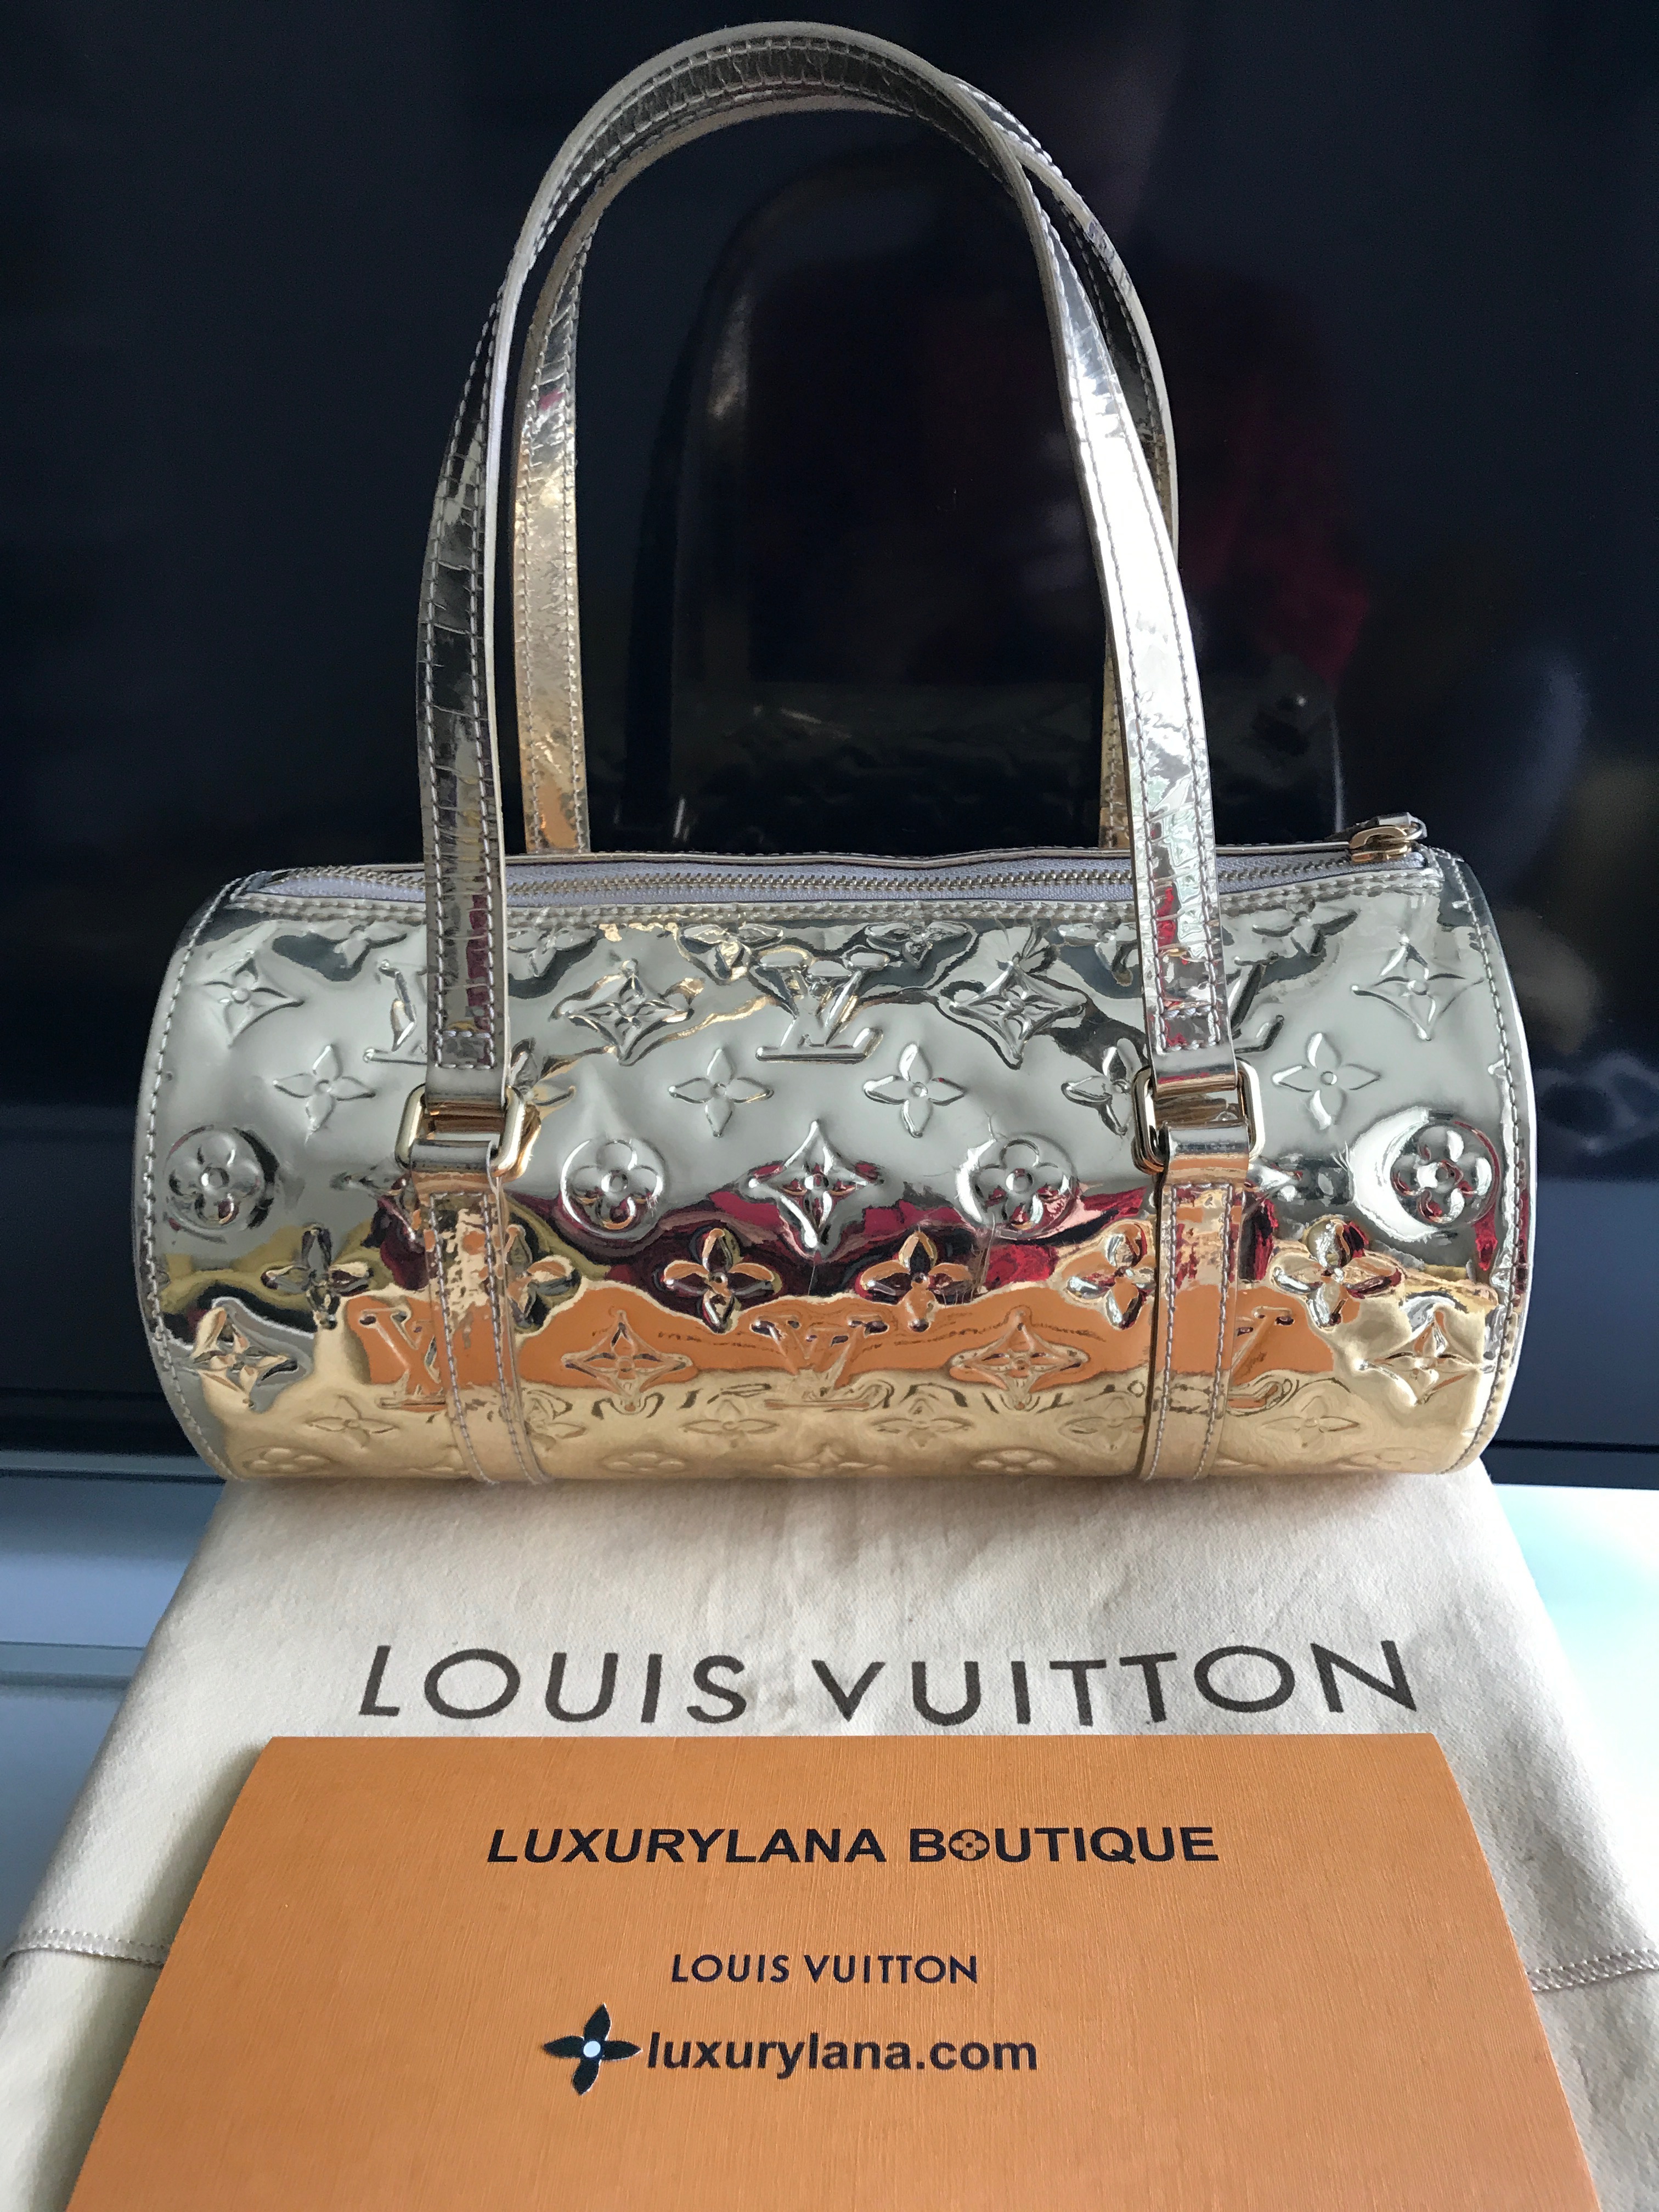 AUTHENTIC LOUIS VUITTON SHINING GOLD MIRROR MIRIOR PAPILLON BAG TOTE  LIMITED 